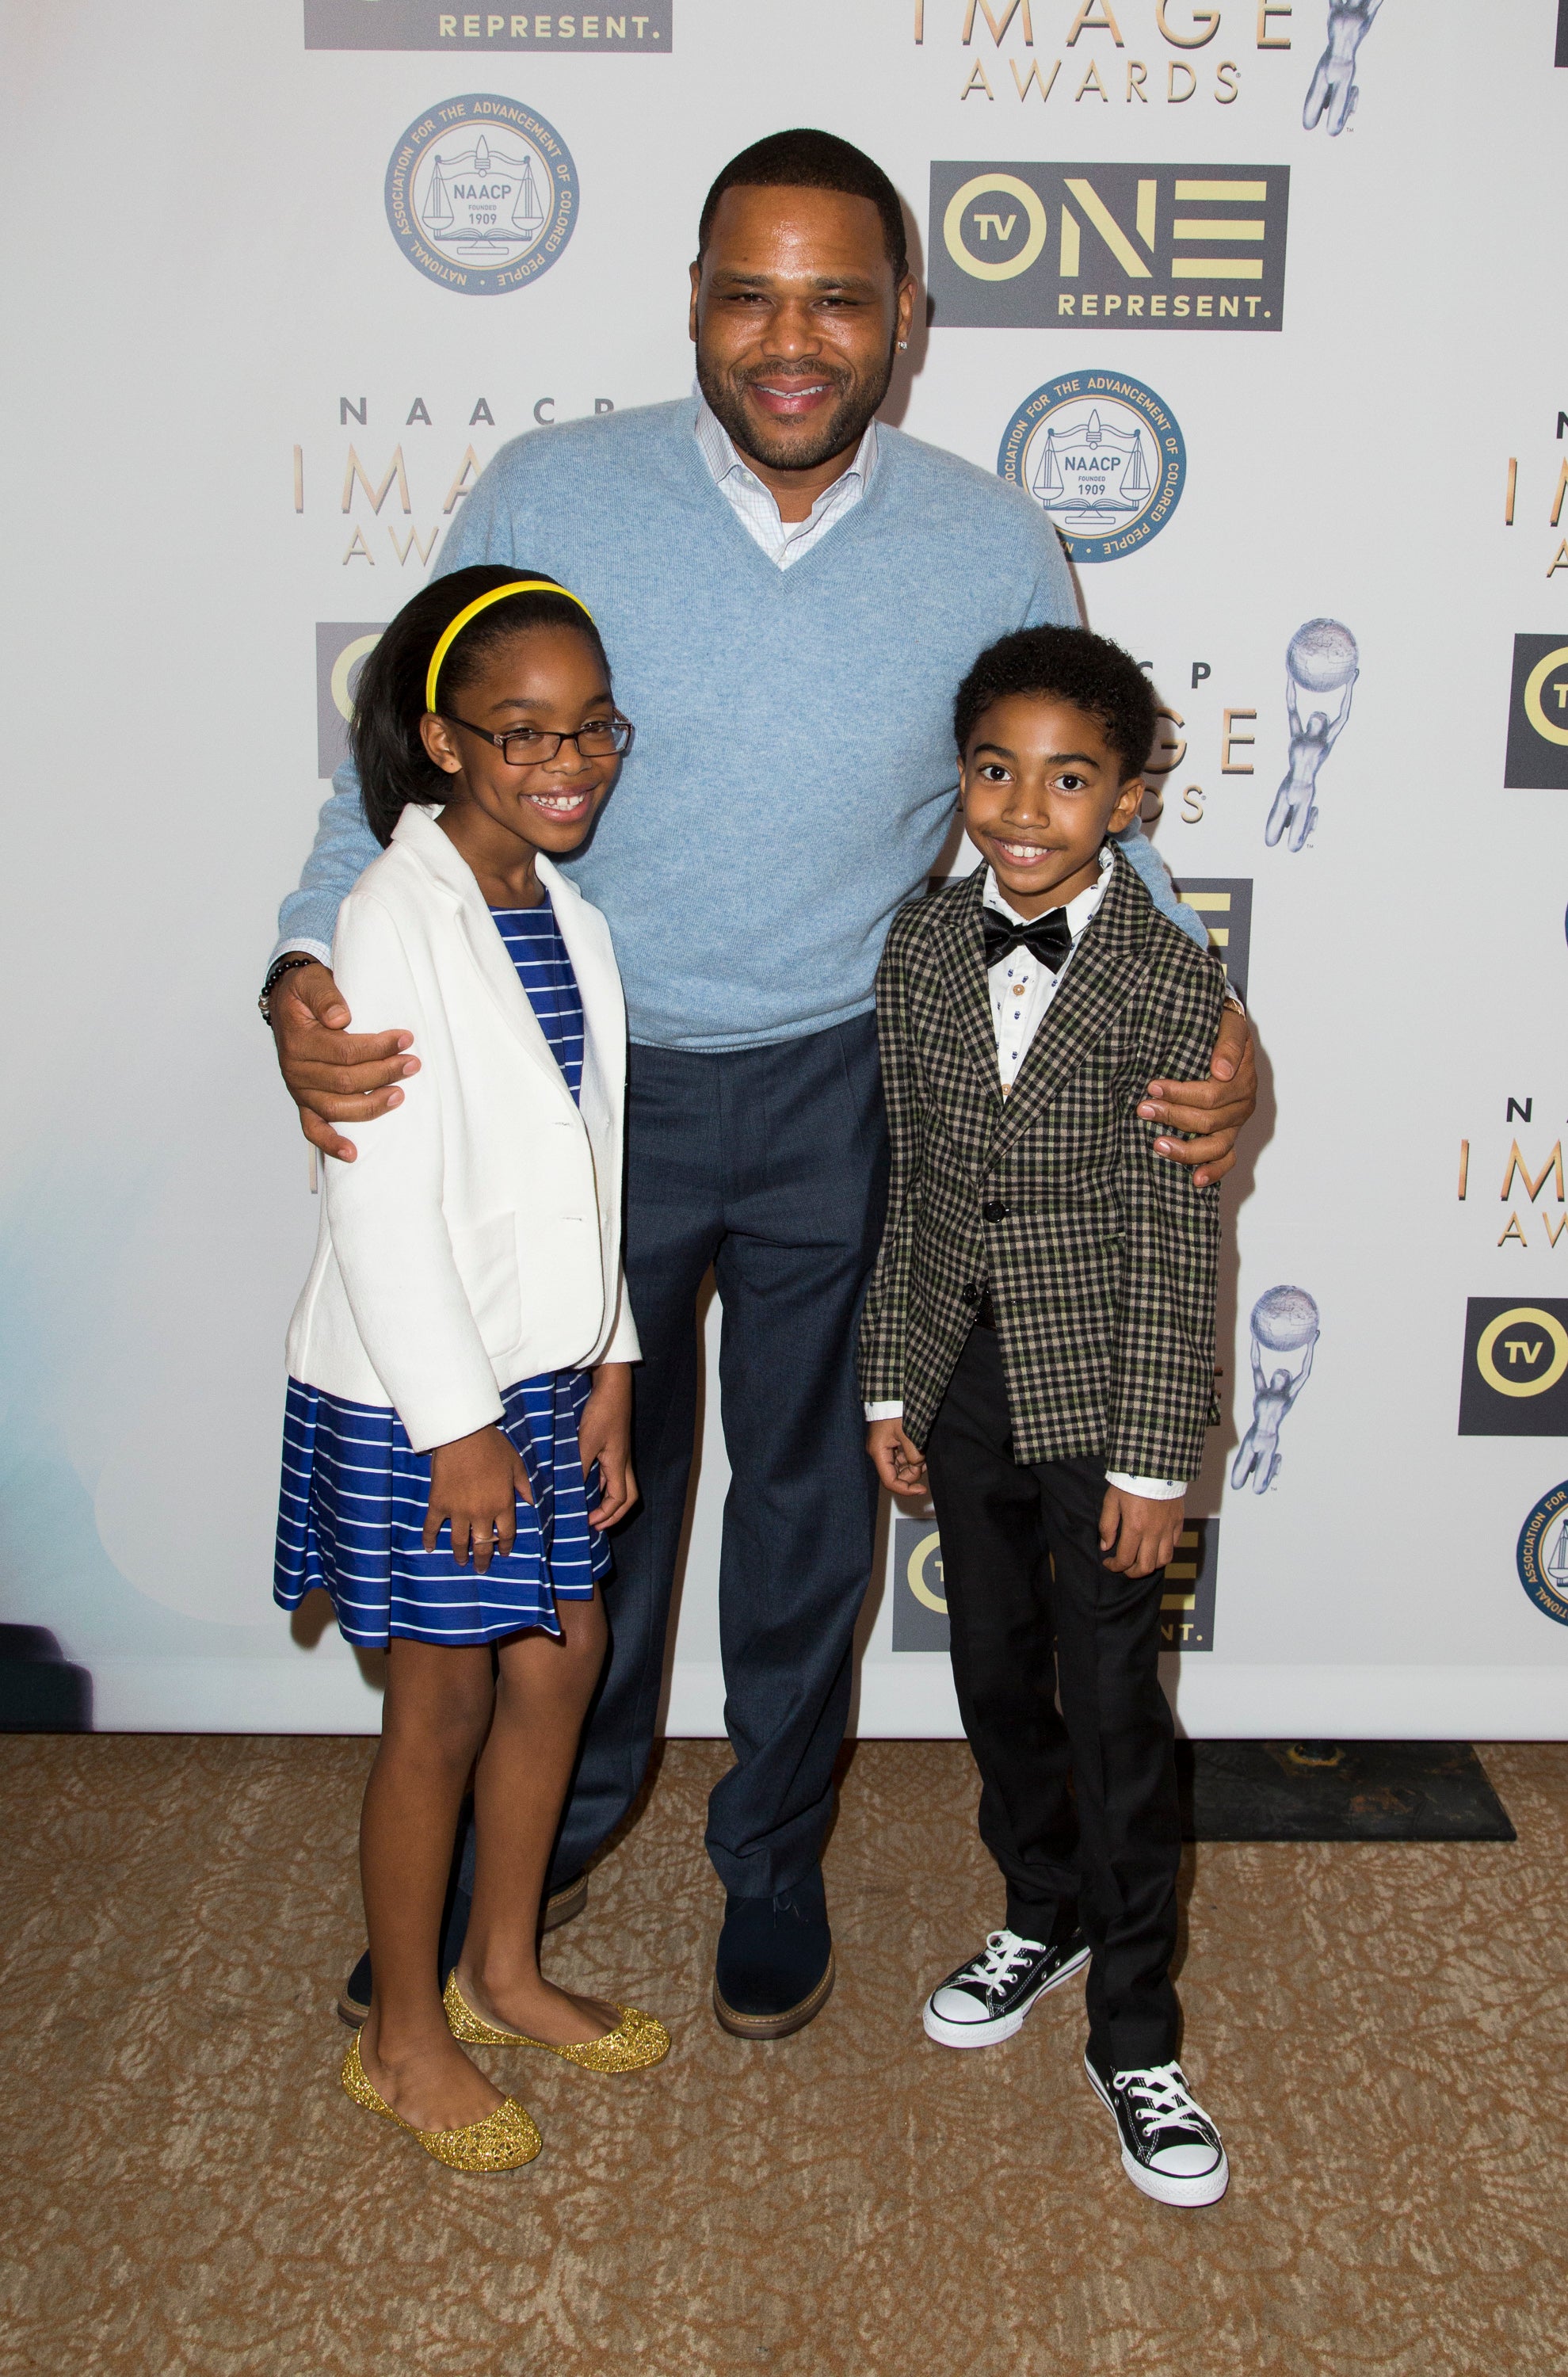 A Look Inside the 47th NAACP Image Awards Nominees' Luncheon
